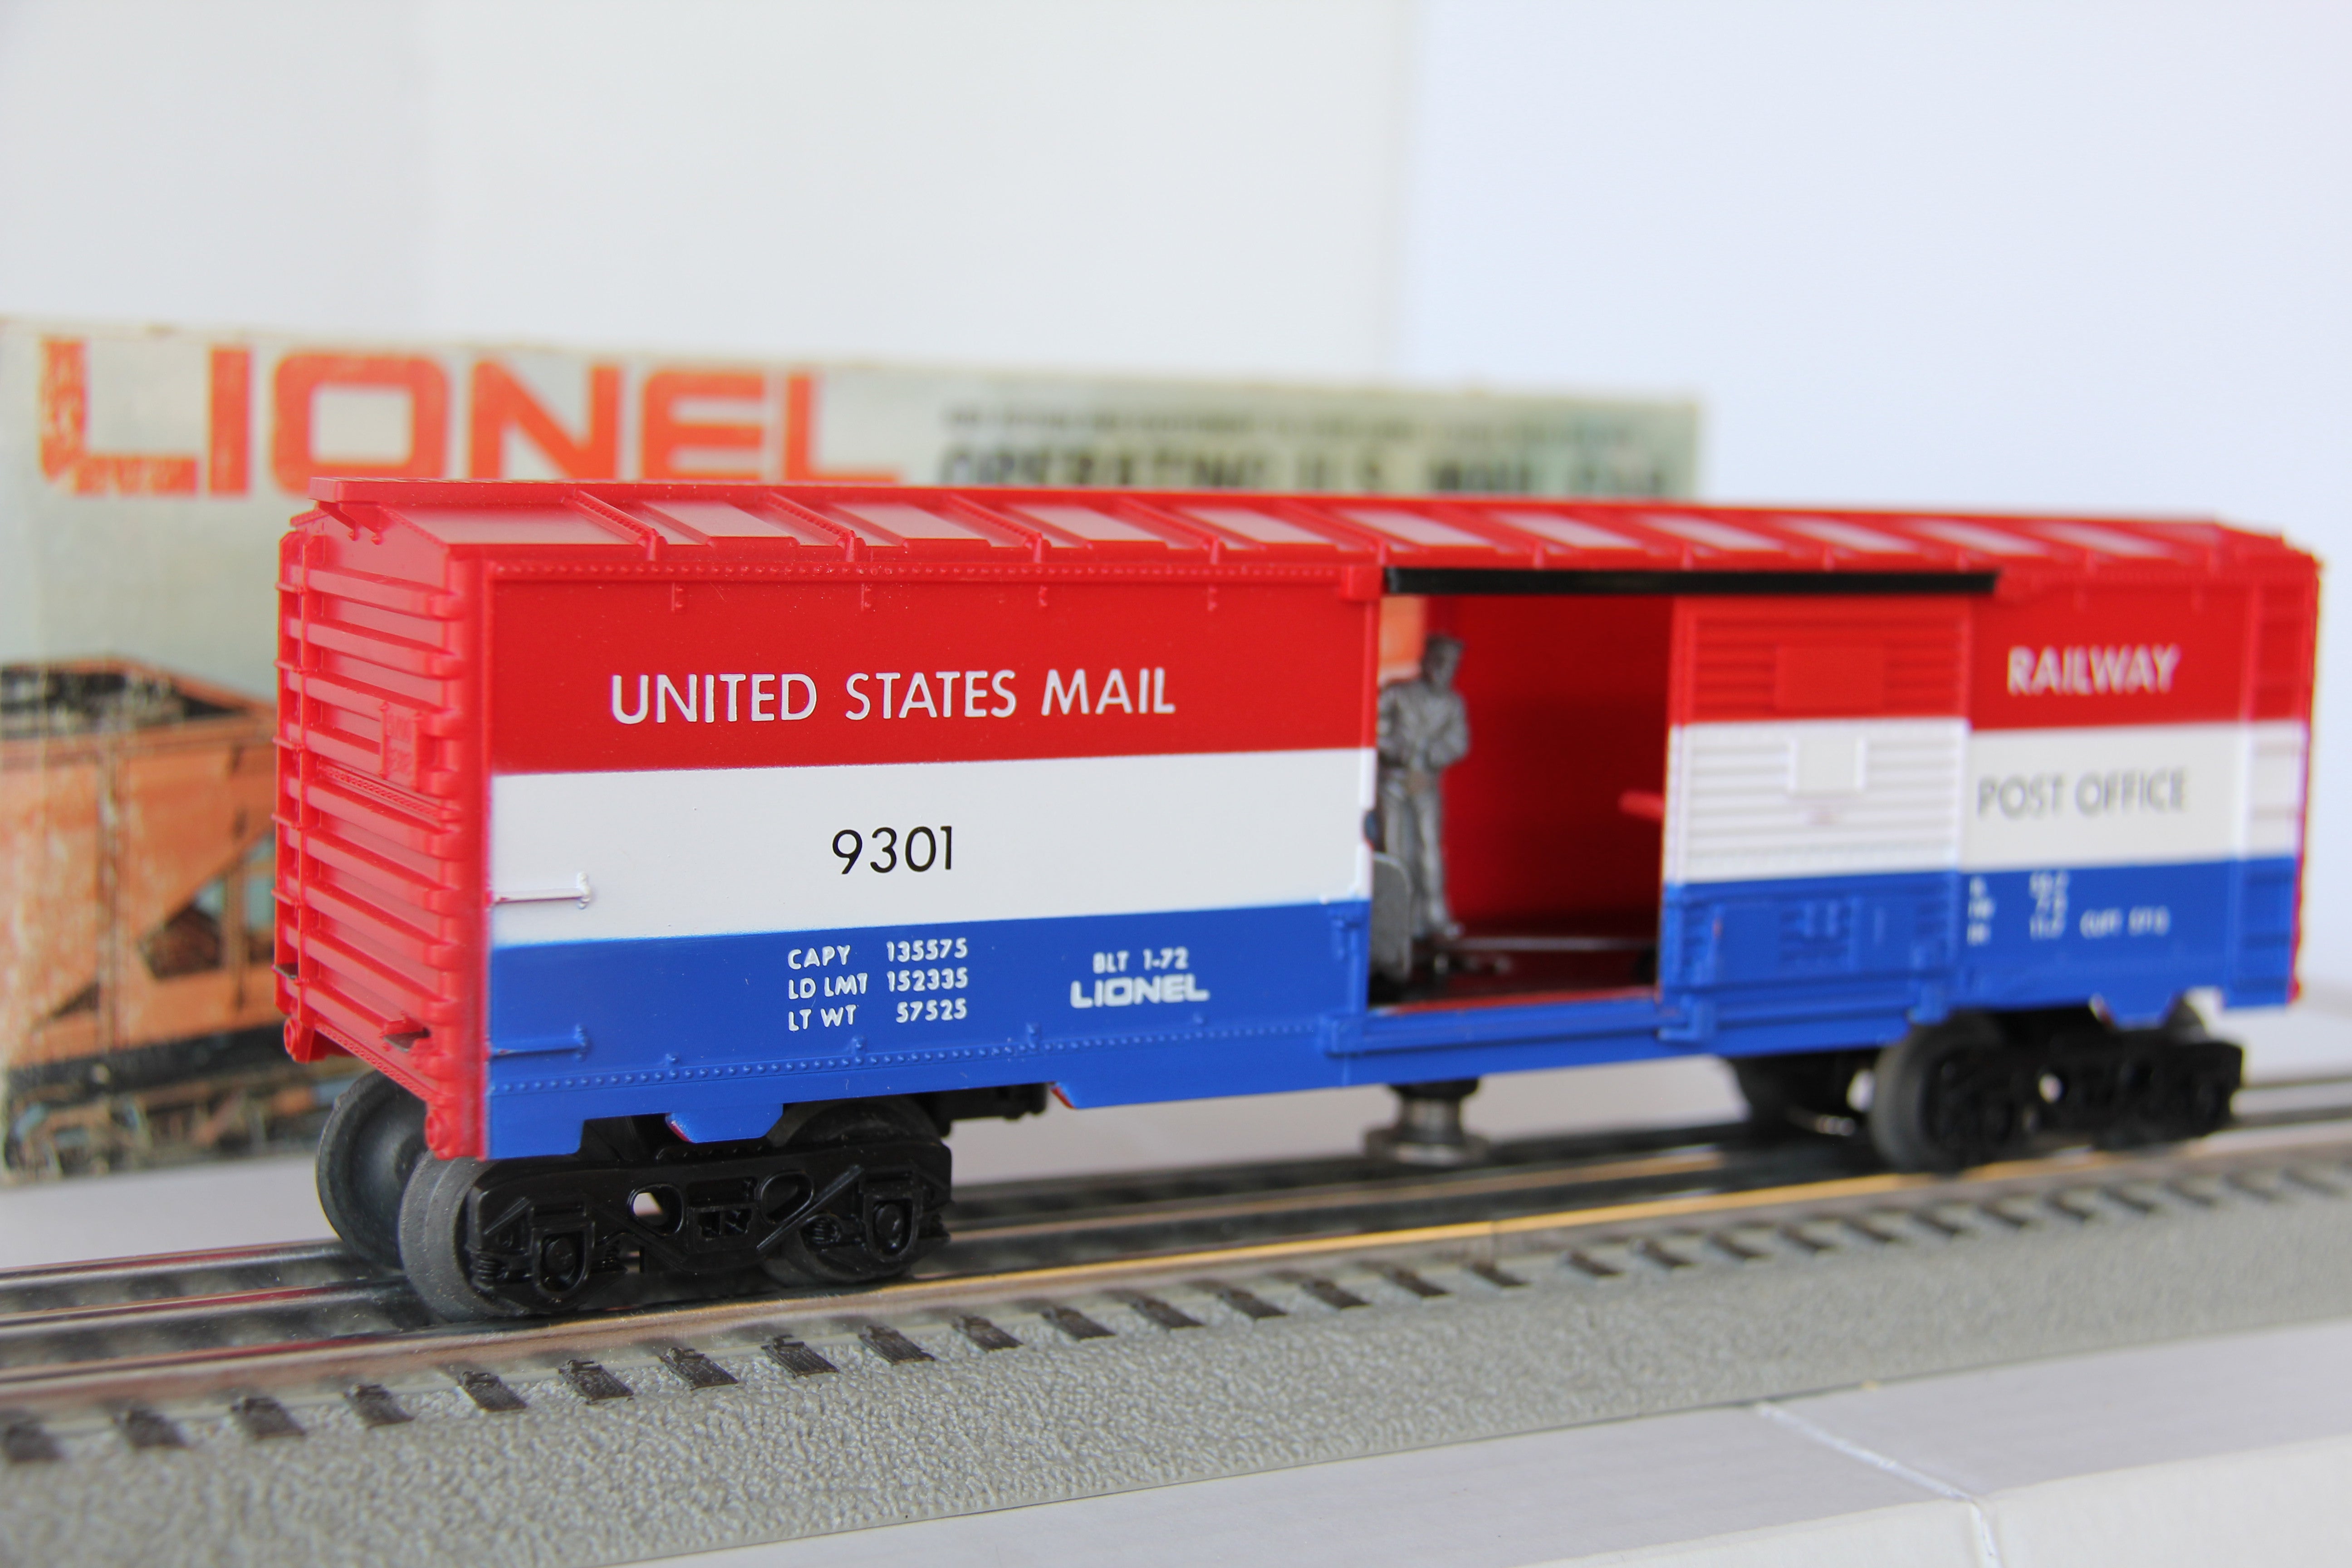 Lionel 6-9301 Operating US Mail Car-Second hand-M3970